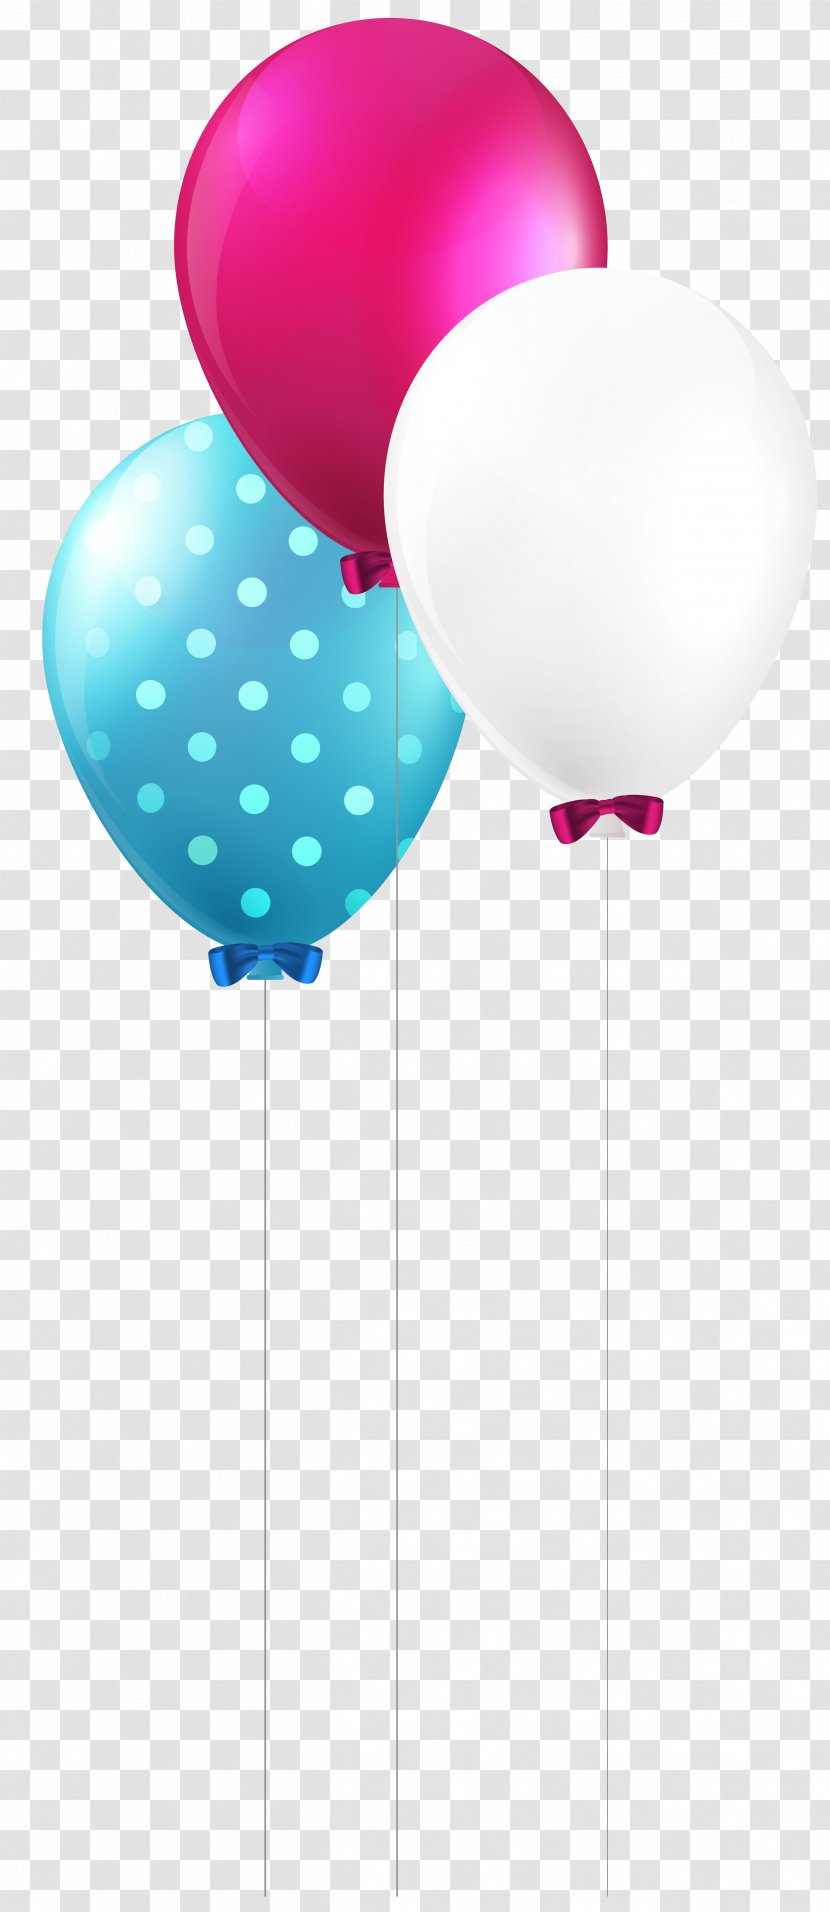 A Tale Of Five Balloons Toy Balloon Clip Art - Gift - Red Baloons Transparent PNG